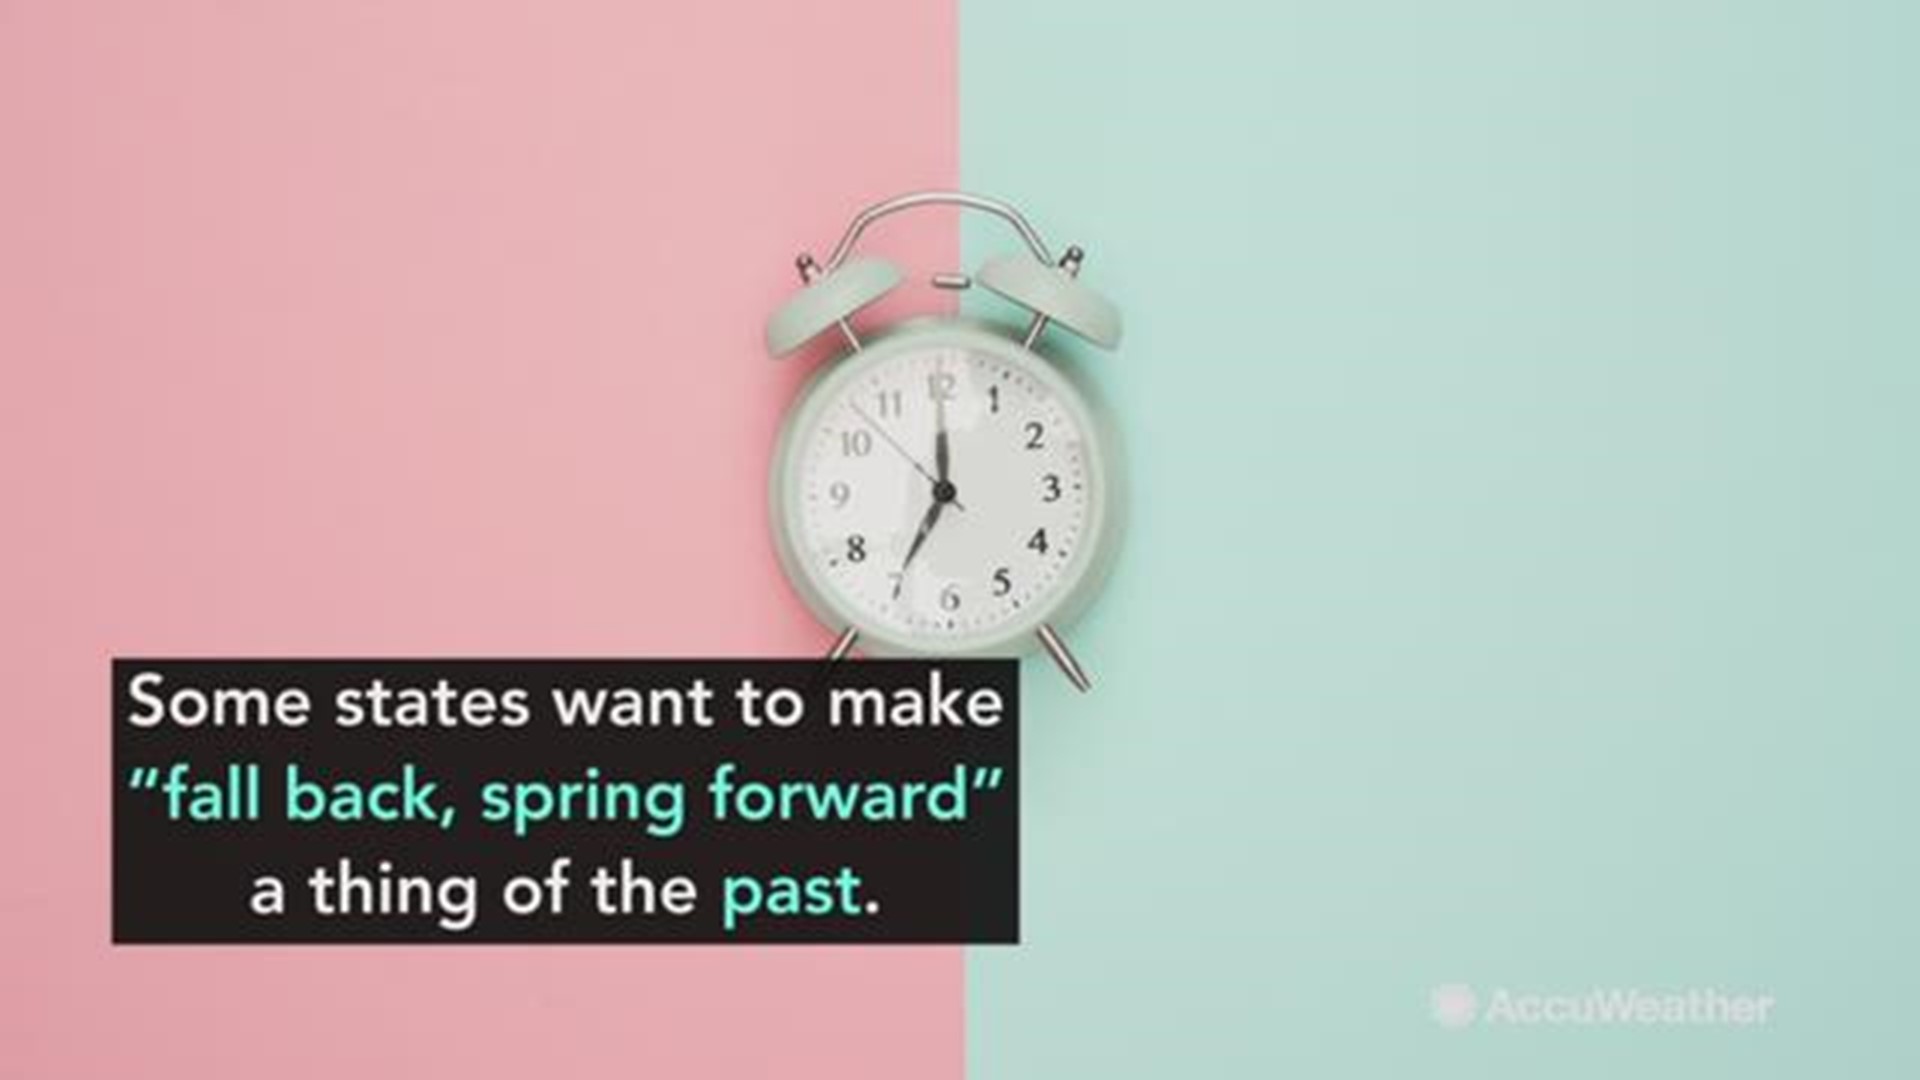 States like Florida, Massachusetts and Maine want to make 'fall back, spring forward' a thing of the past and remain permanently on Daylight Saving Time (DST).